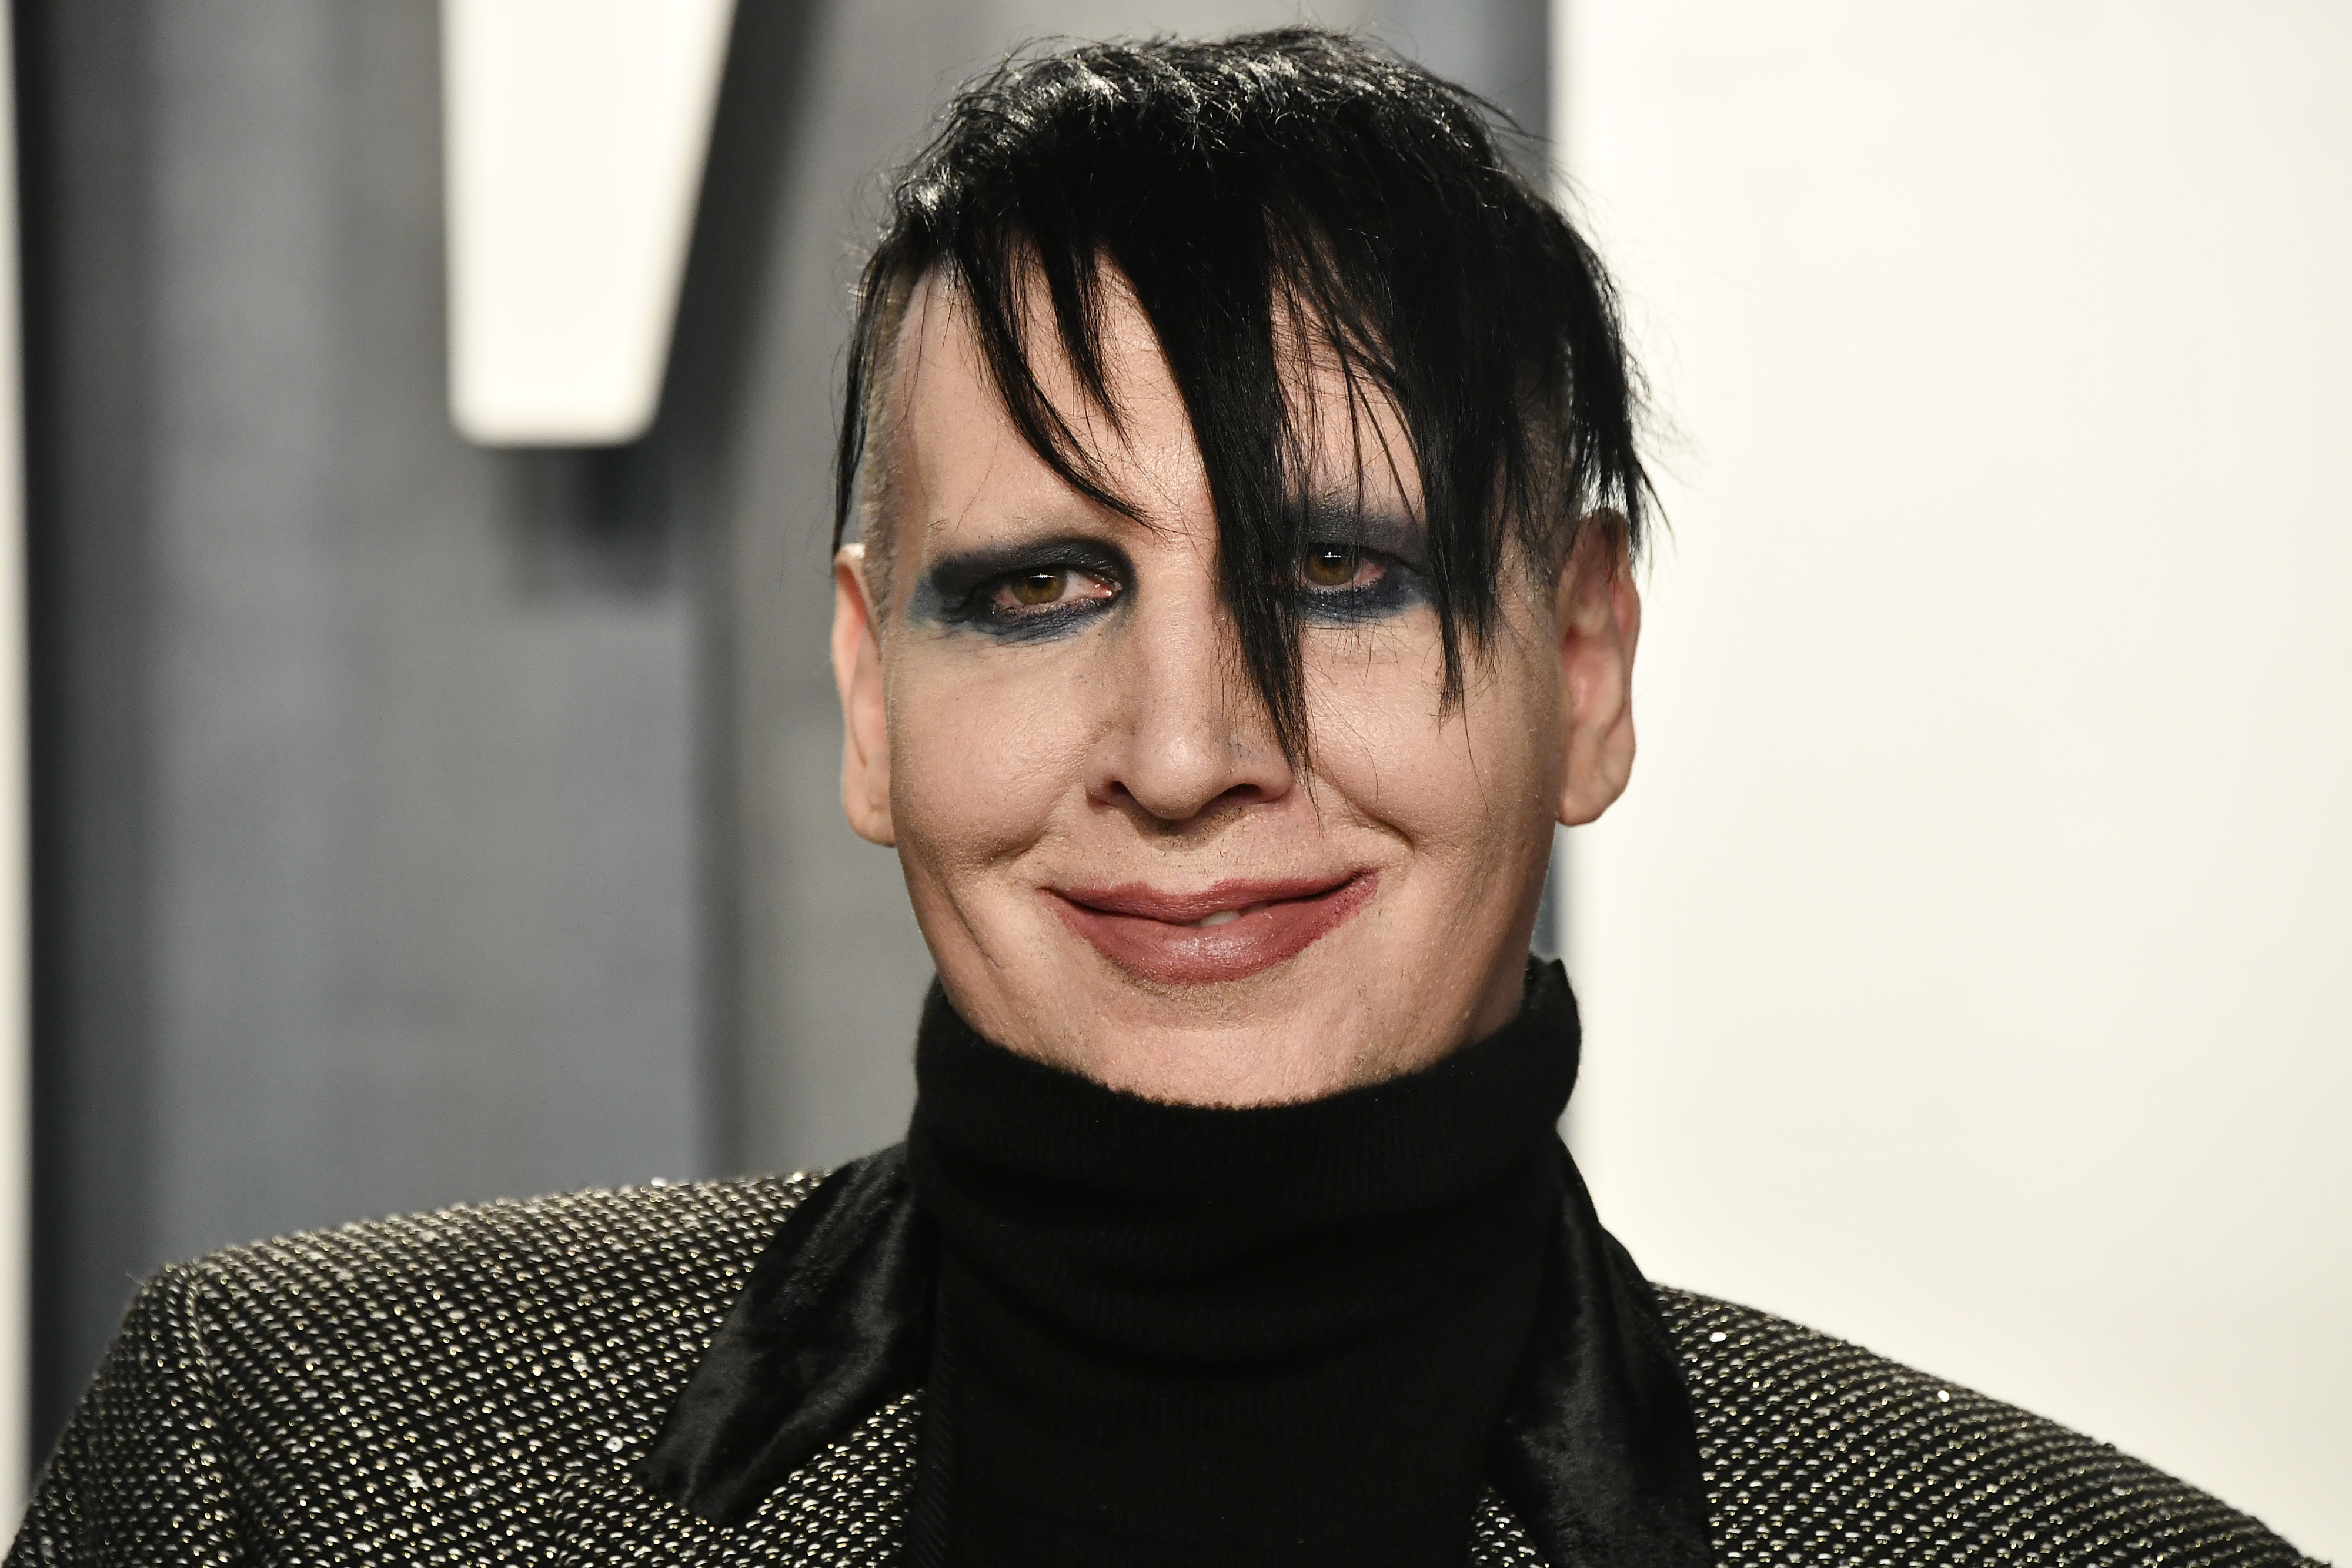 Marilyn Manson Lawsuit From Former Assistant Dismissed For 2nd Time: Report